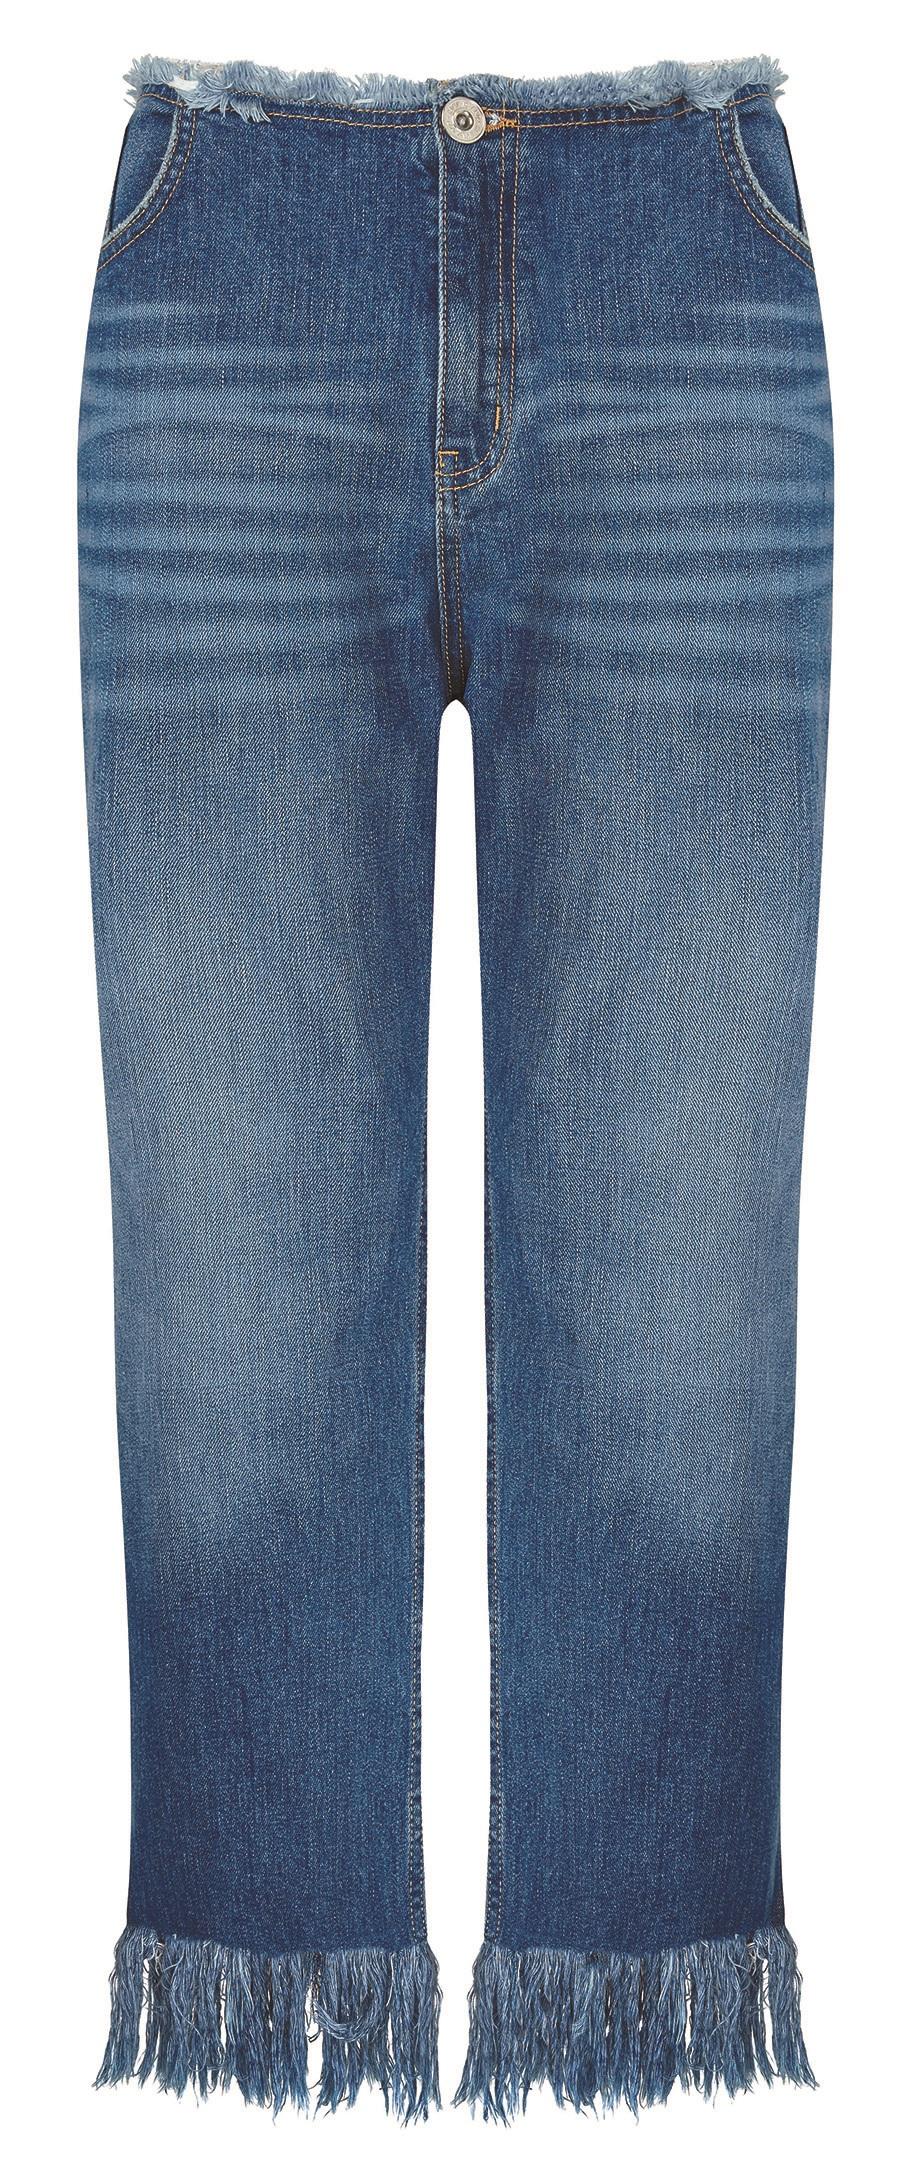 River Island, Frayed Jeans, £42